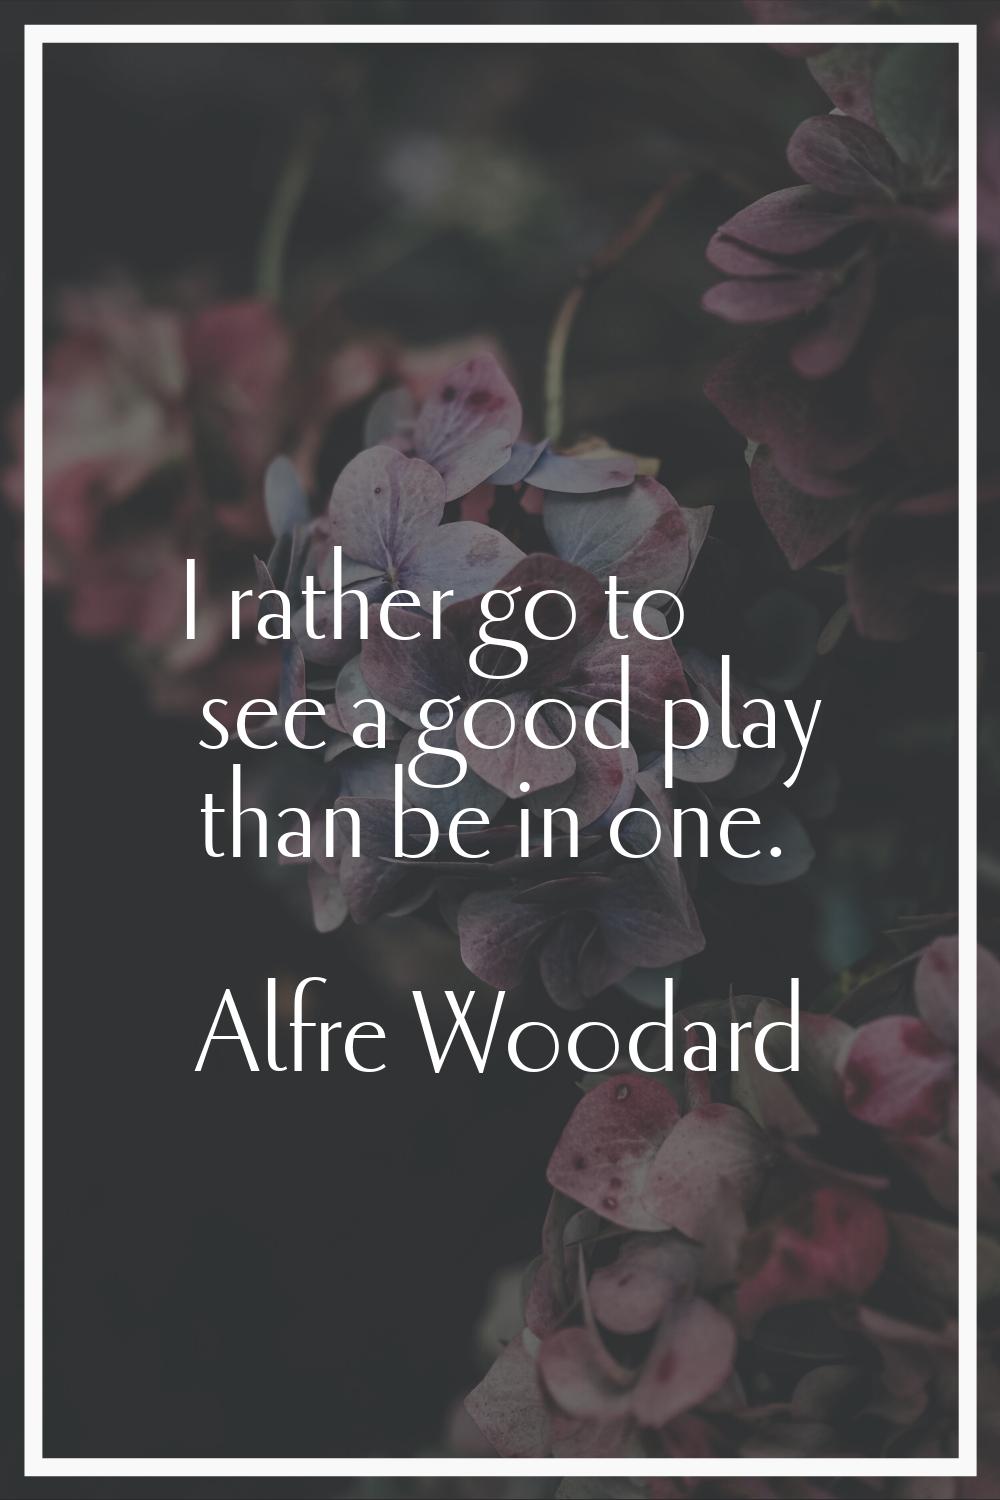 I rather go to see a good play than be in one.